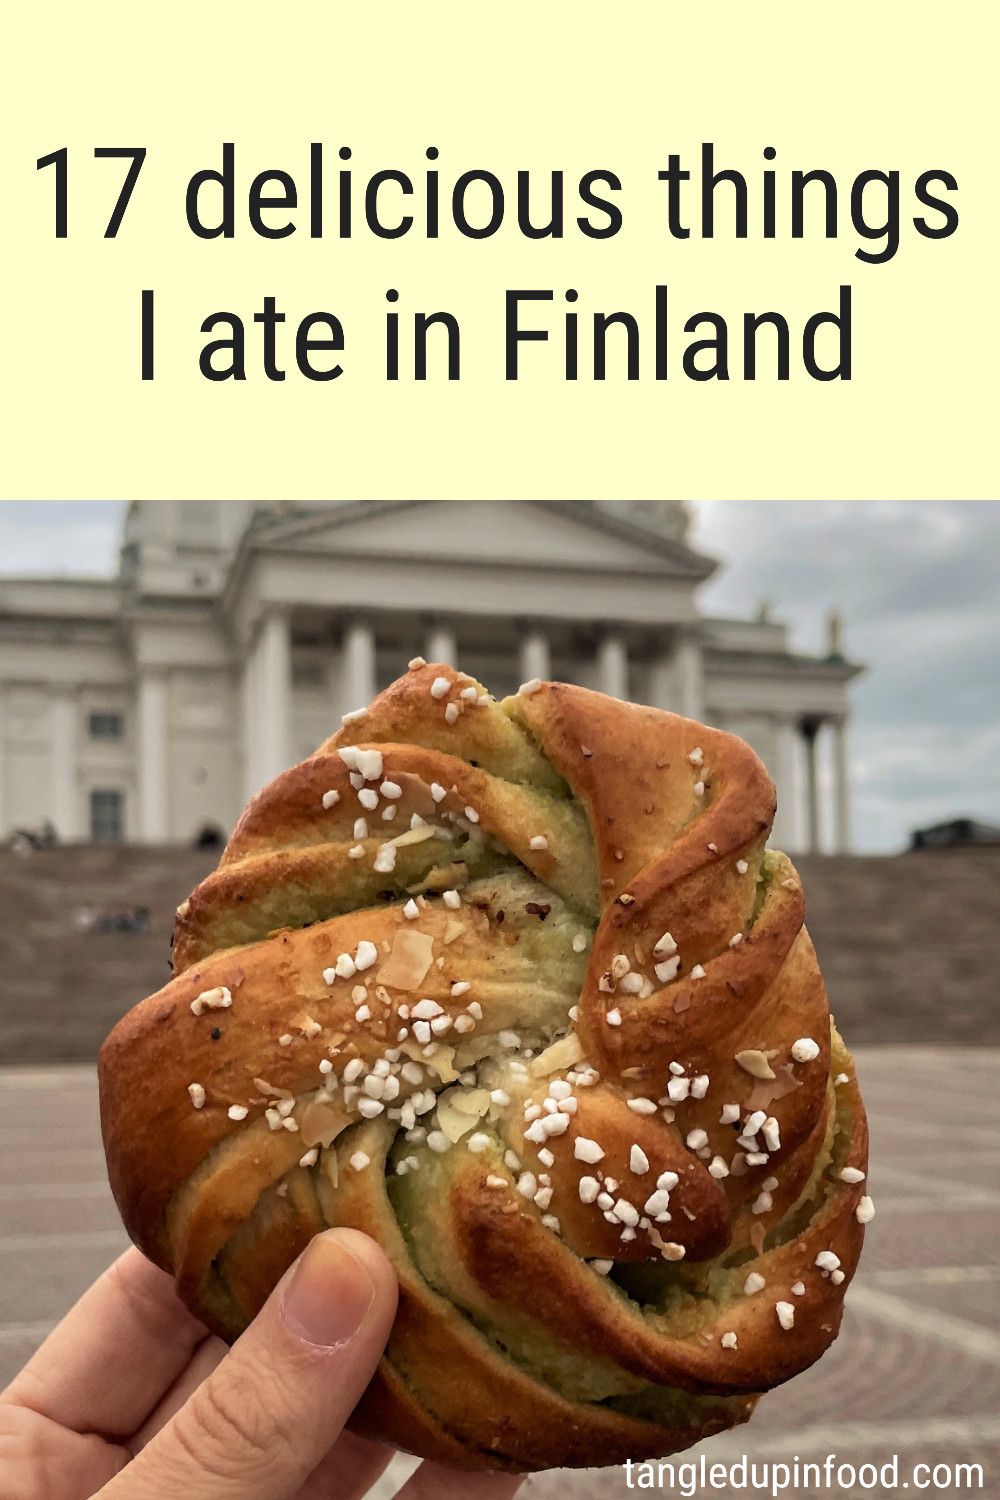 Hand holding pastry in front of Helsinki Cathedral and text reading "17 delicious things I ate in Finland"